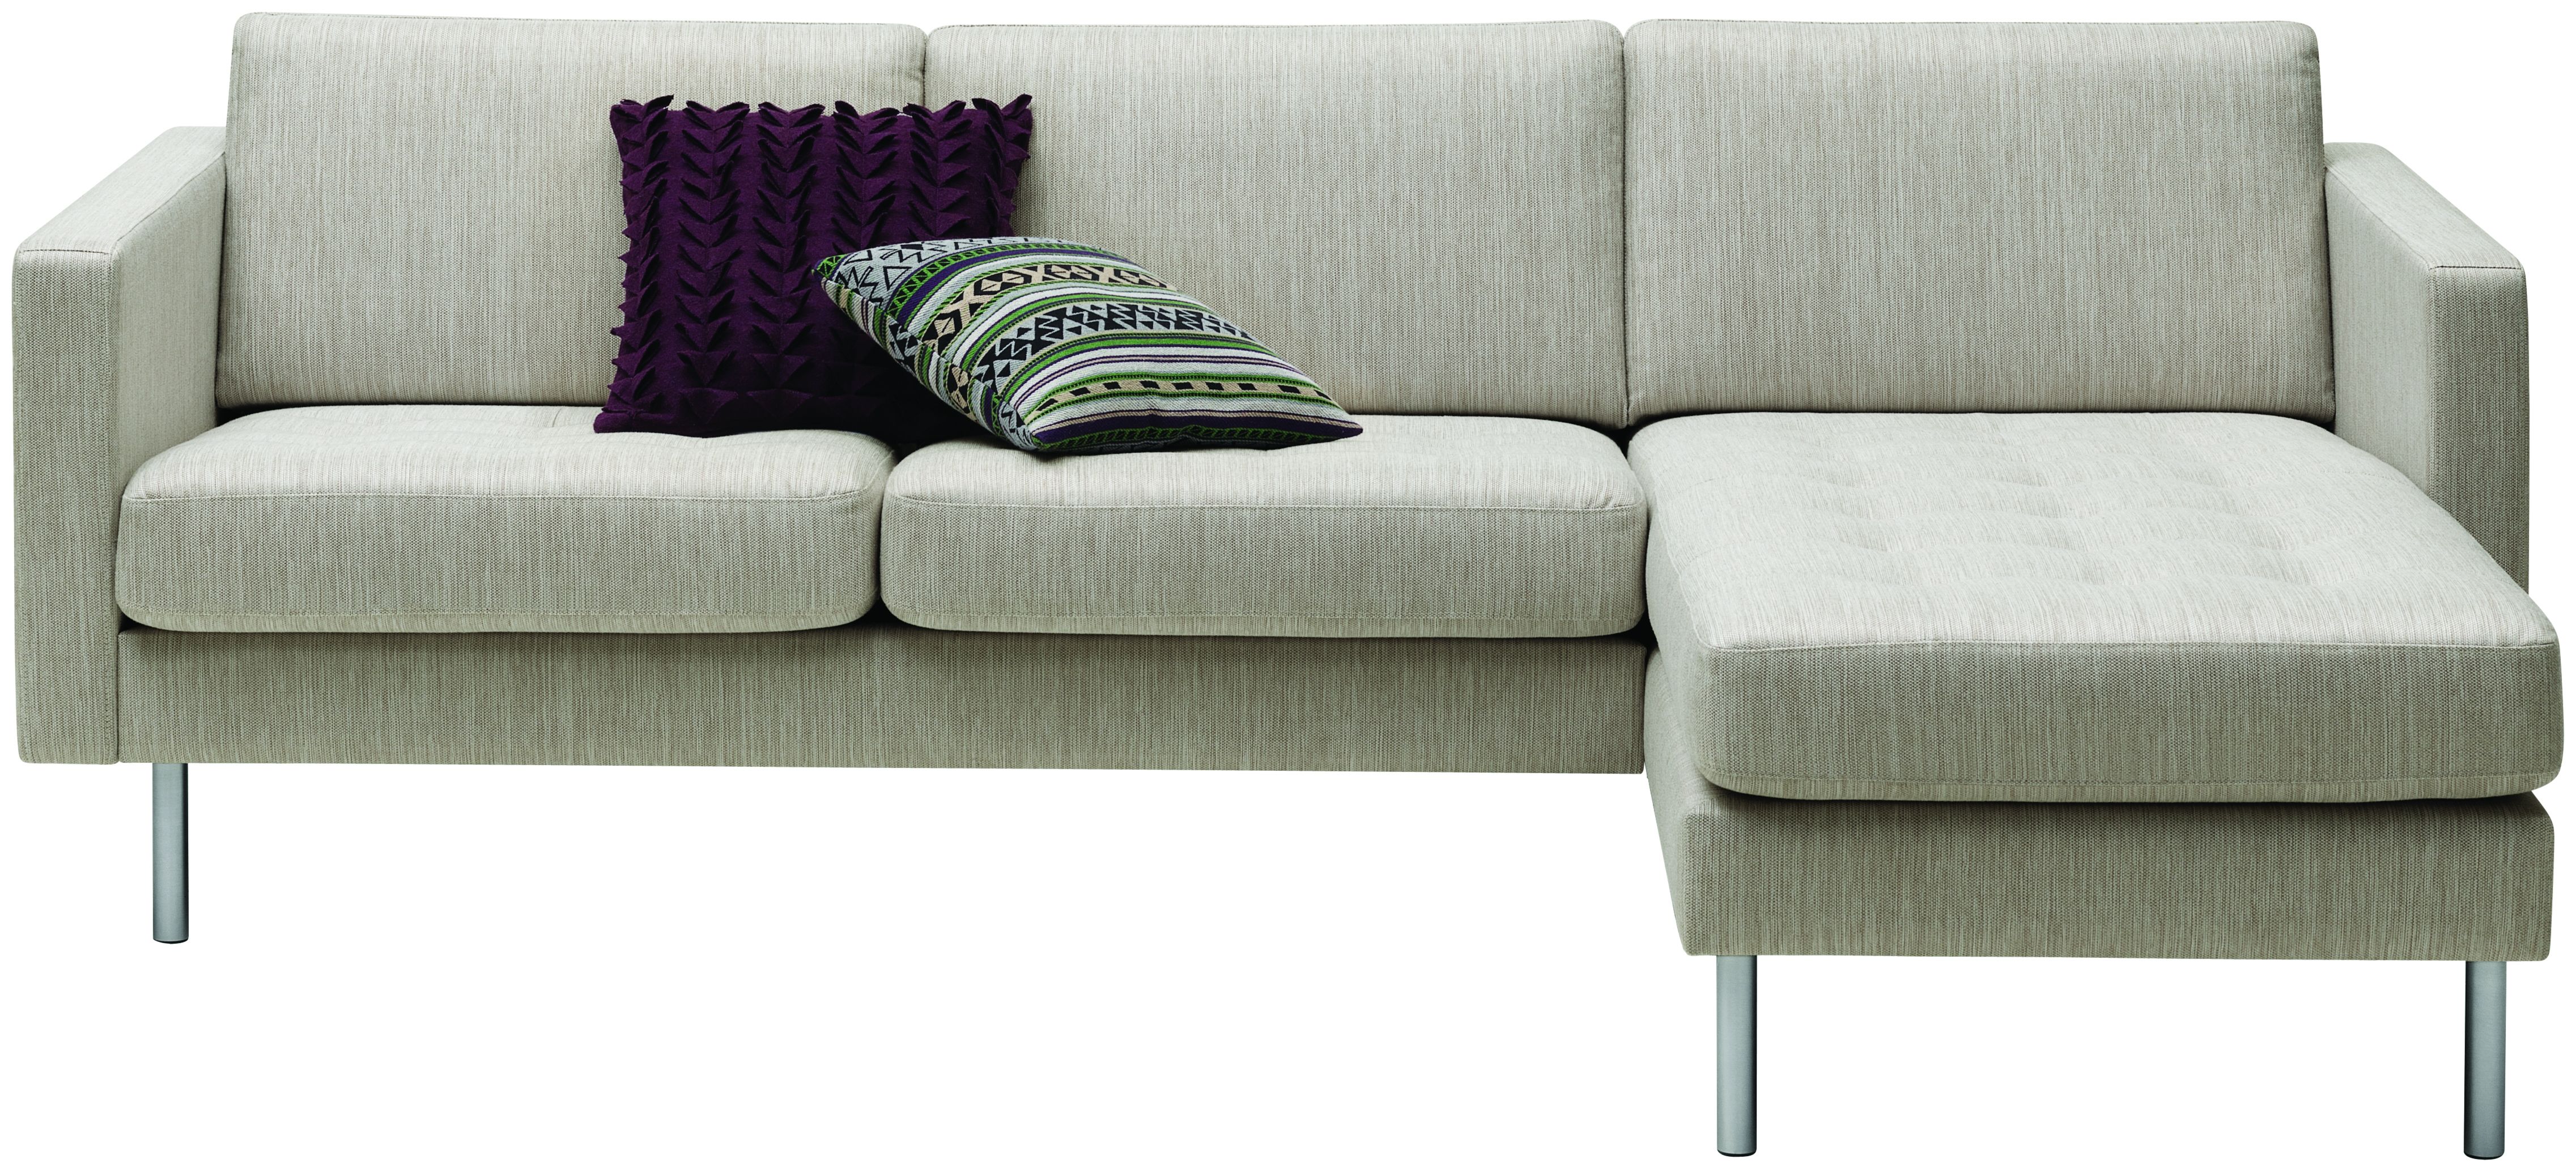 Olympia Sofas Boconcept Cambridge Intended For Customized Sofas (Photo 2 of 12)